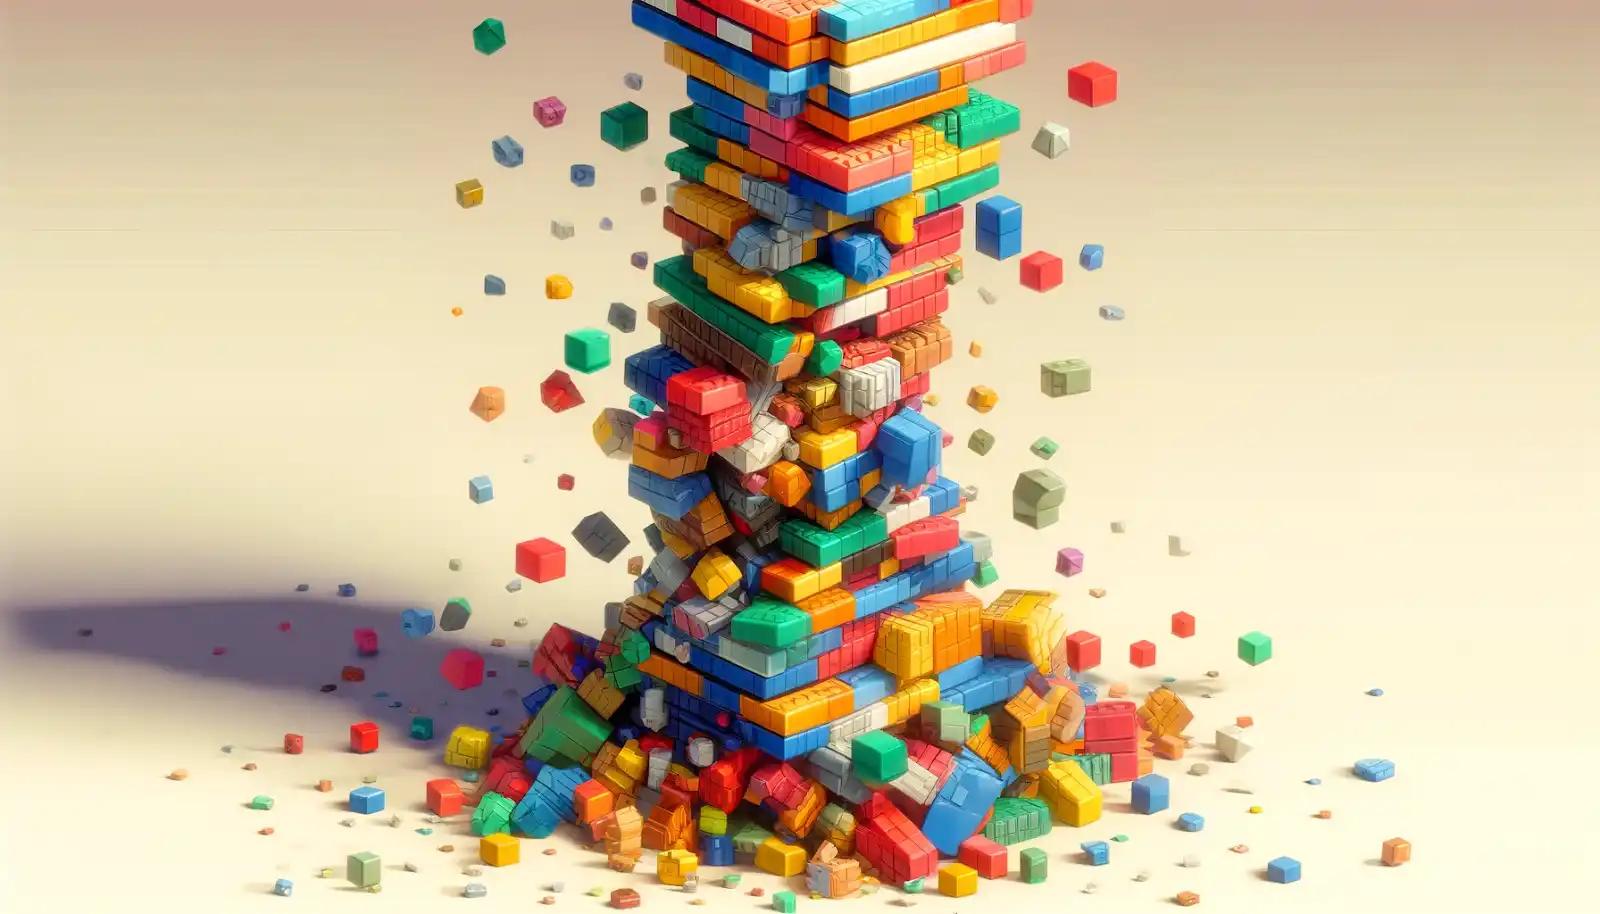 An unstable tower built from colorful building blocks, representing the scalability issue of DAOs.